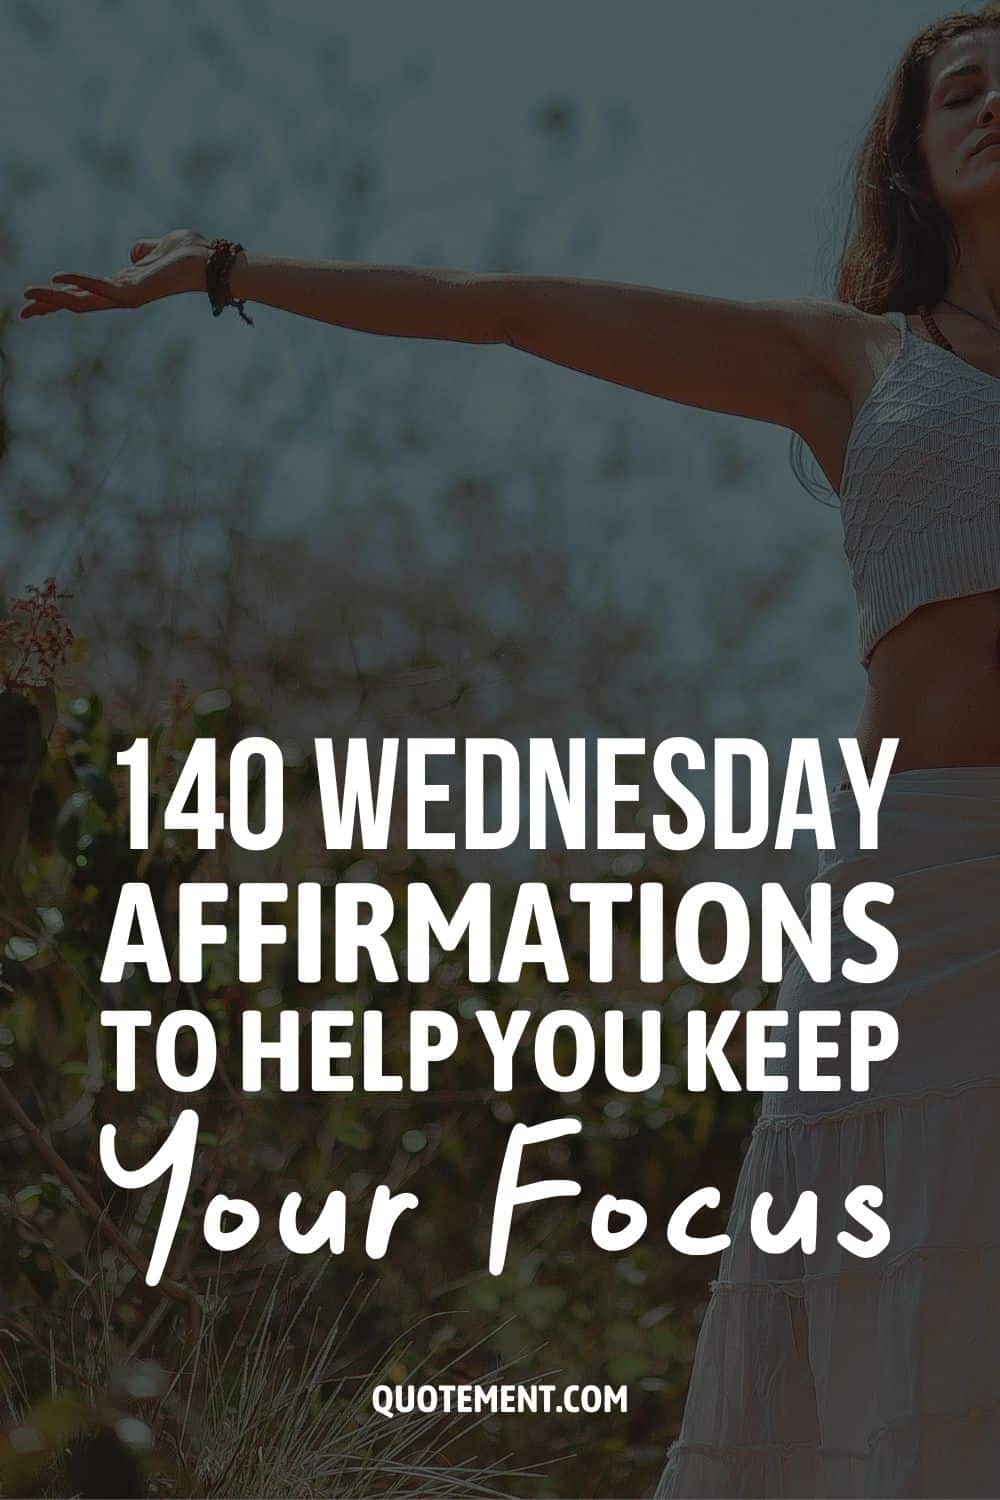 140 Wednesday Affirmations To Help You Keep Your Focus